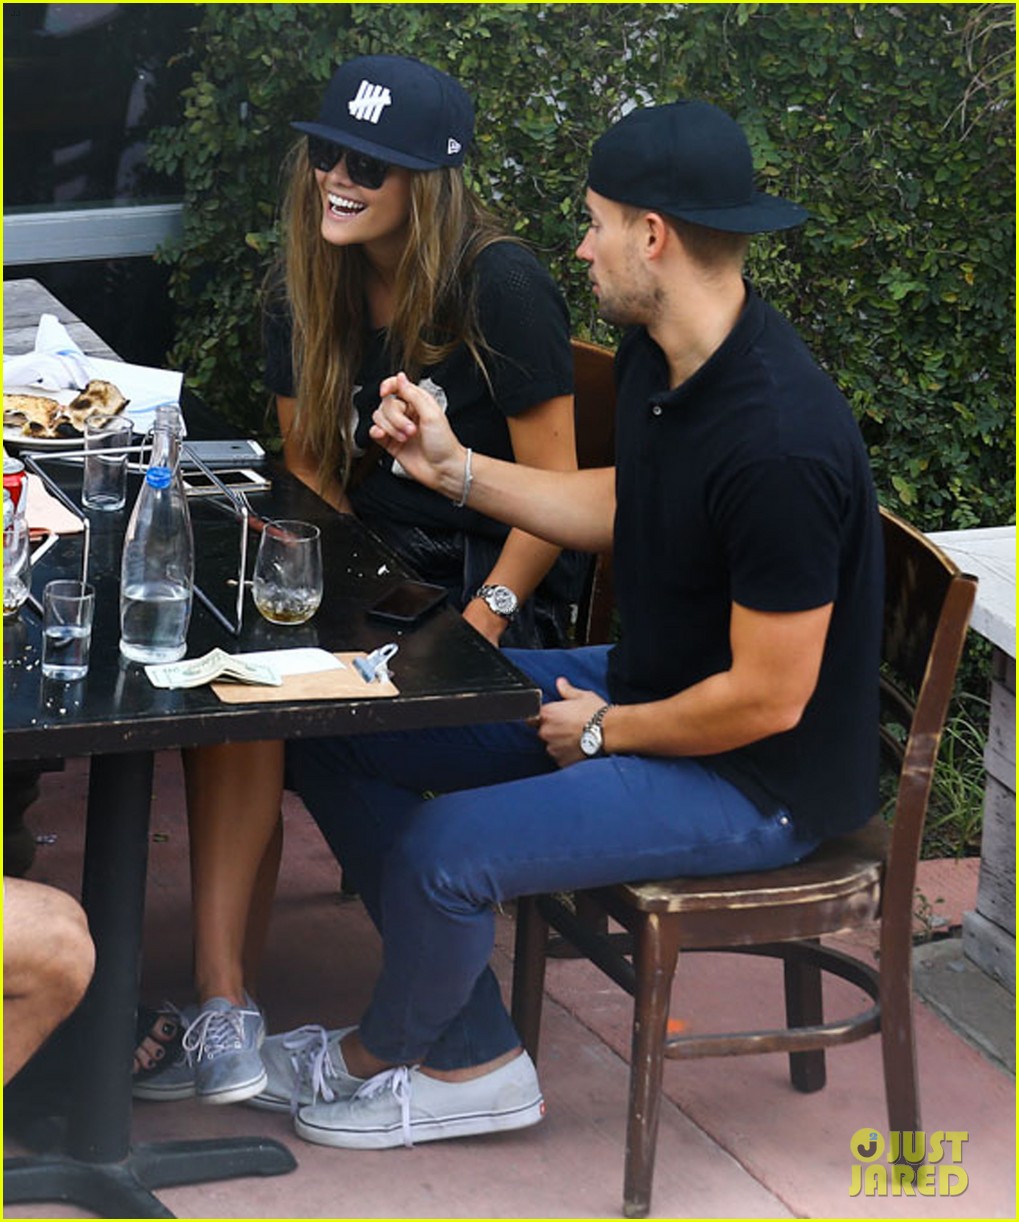 Nina Agdal Shares Cute Moments with Her Boyfriend in Miami: Photo